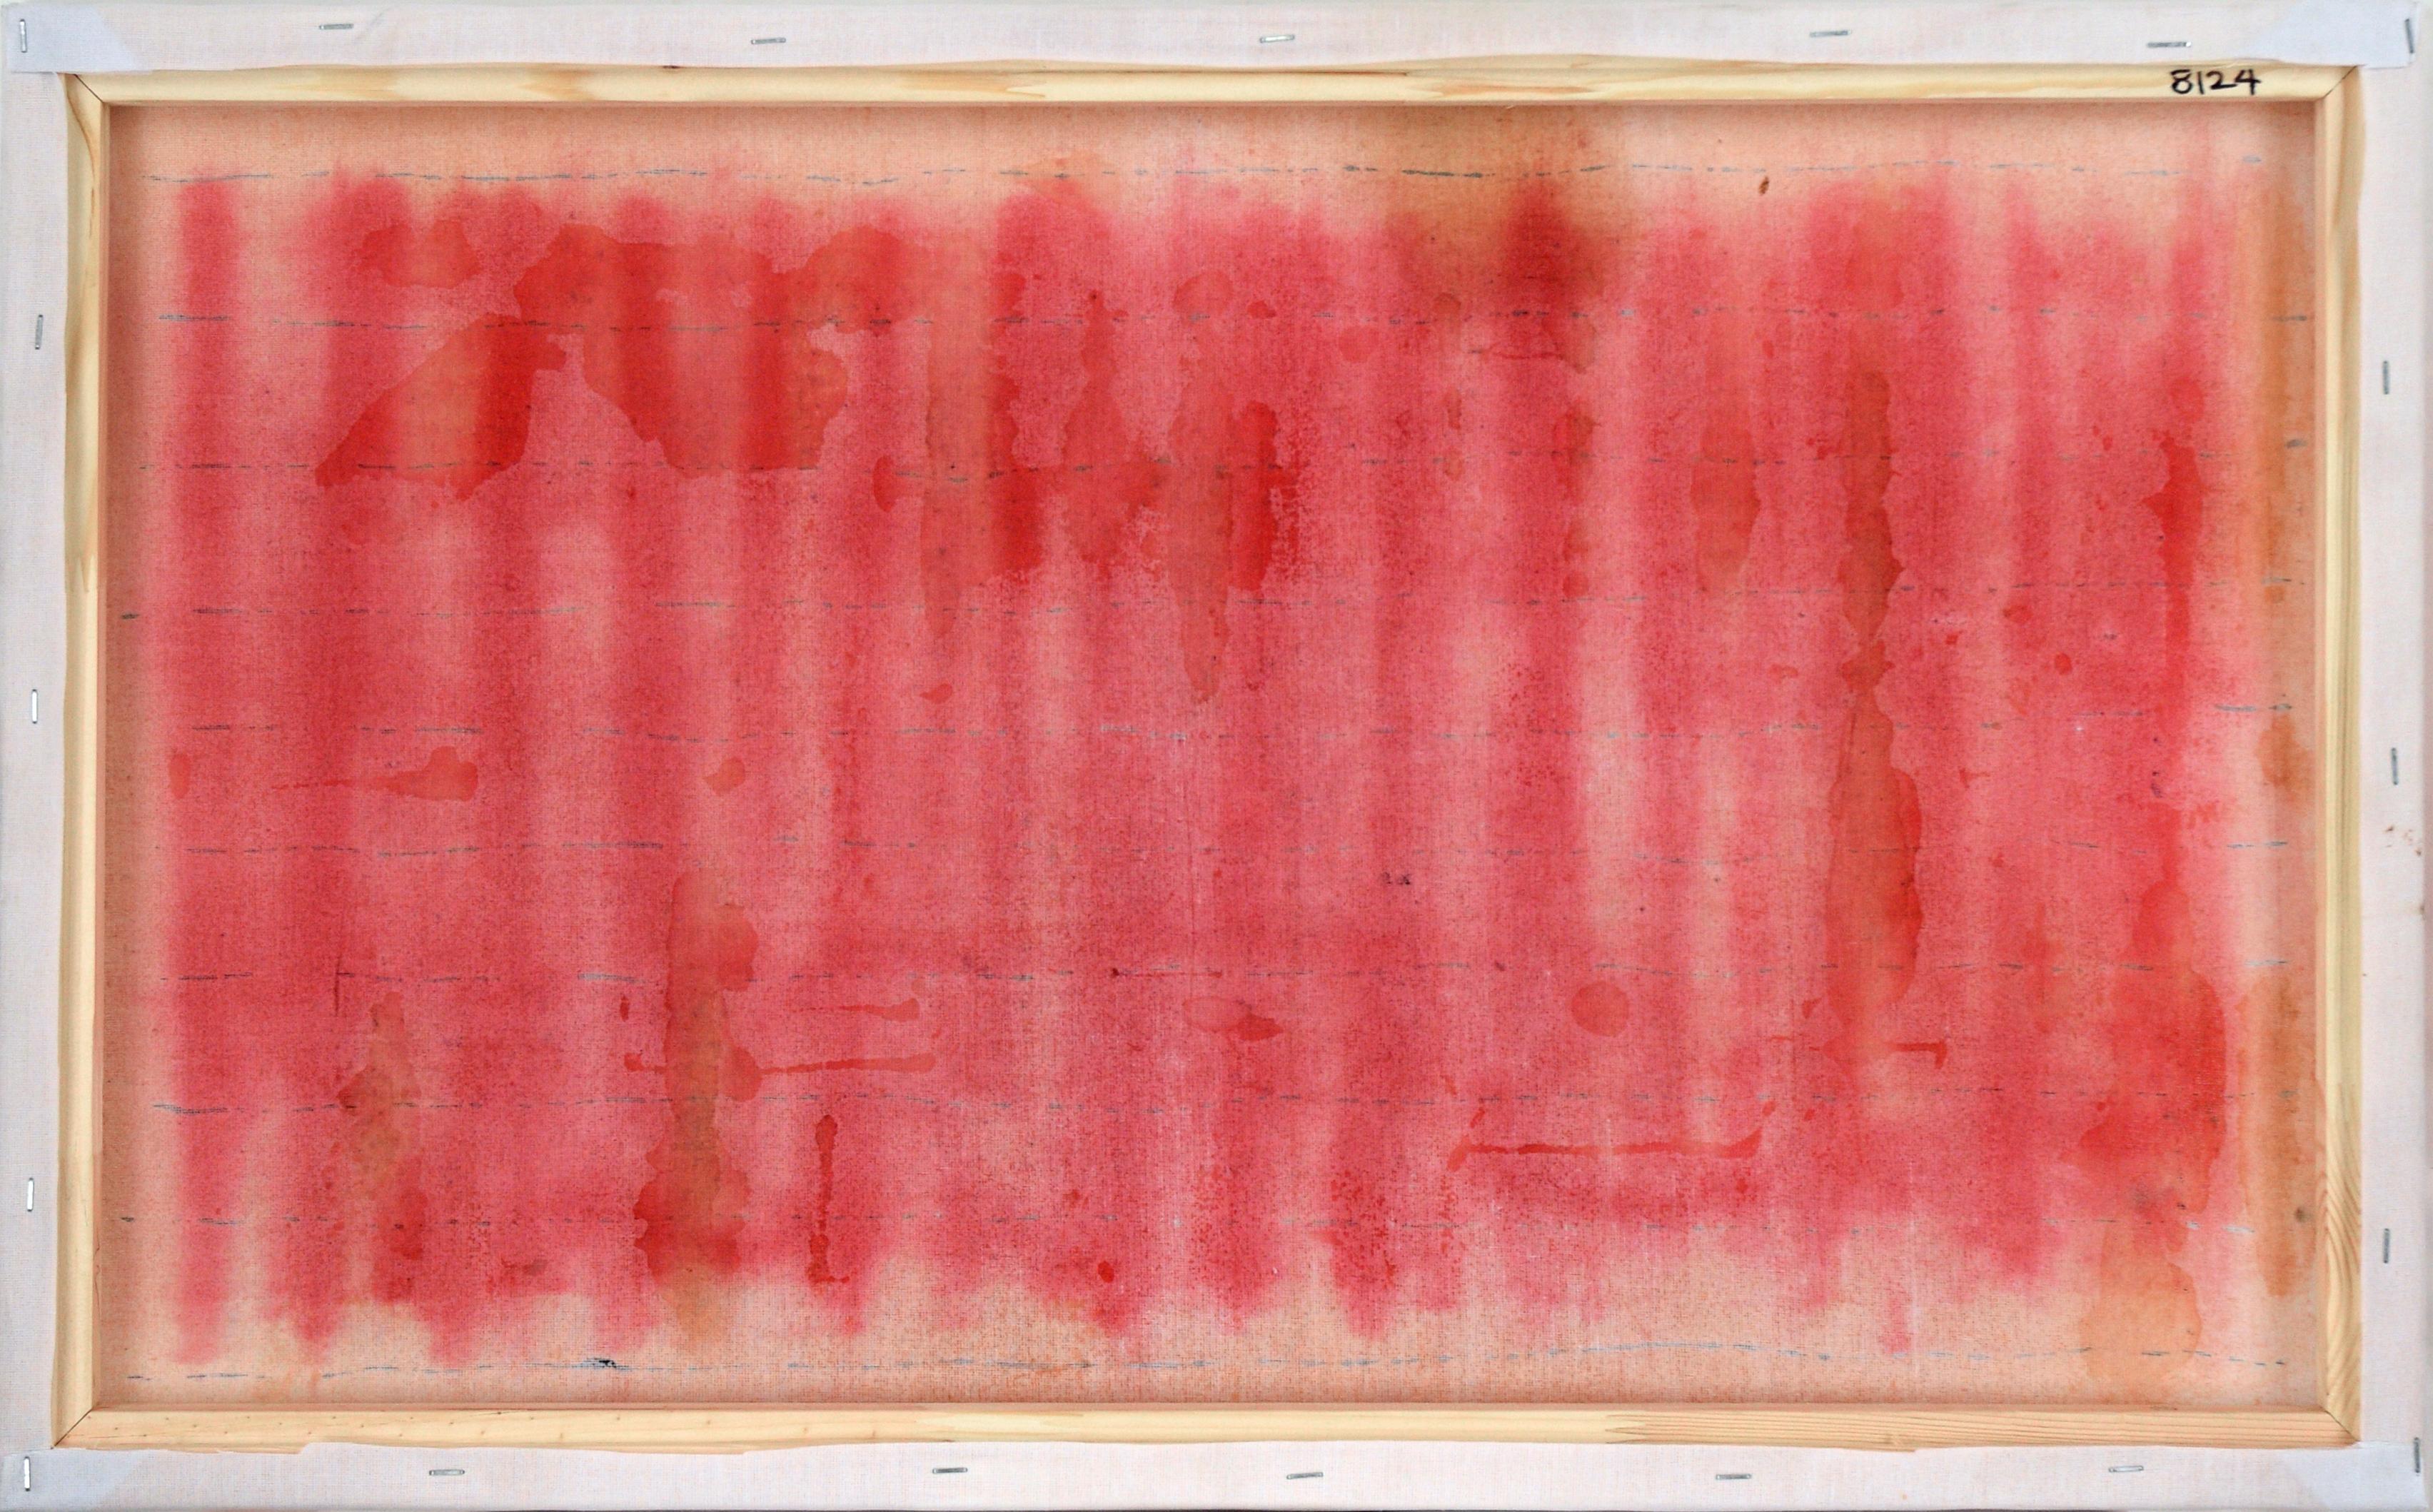 Black Lines Across a Red Field - Abstract Composition on Starched Linen For Sale 5